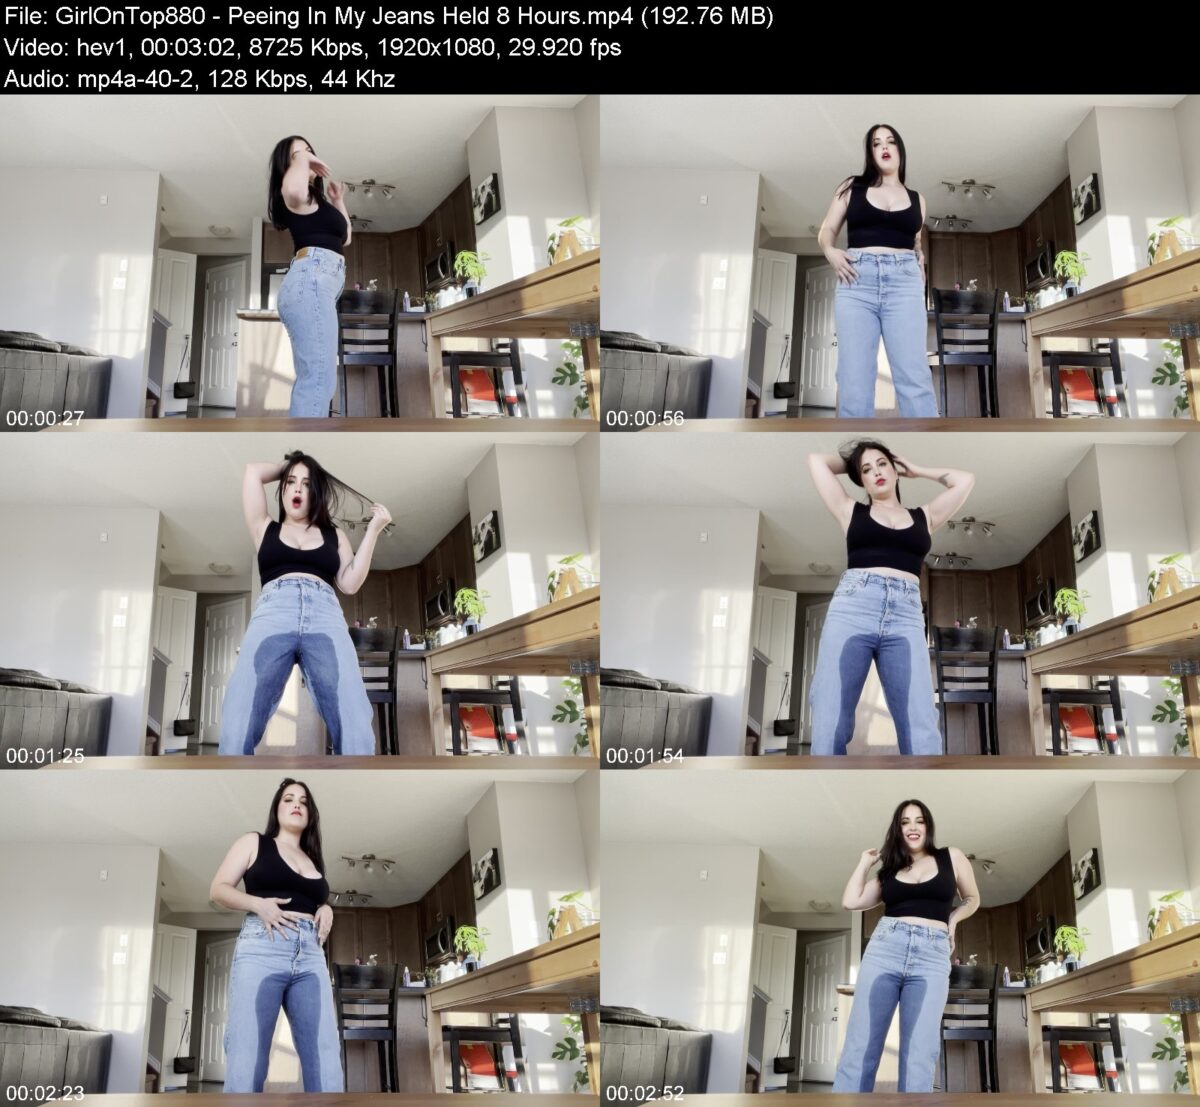 Actress: GirlOnTop880. Title and Studio: Peeing In My Jeans Held 8 Hours